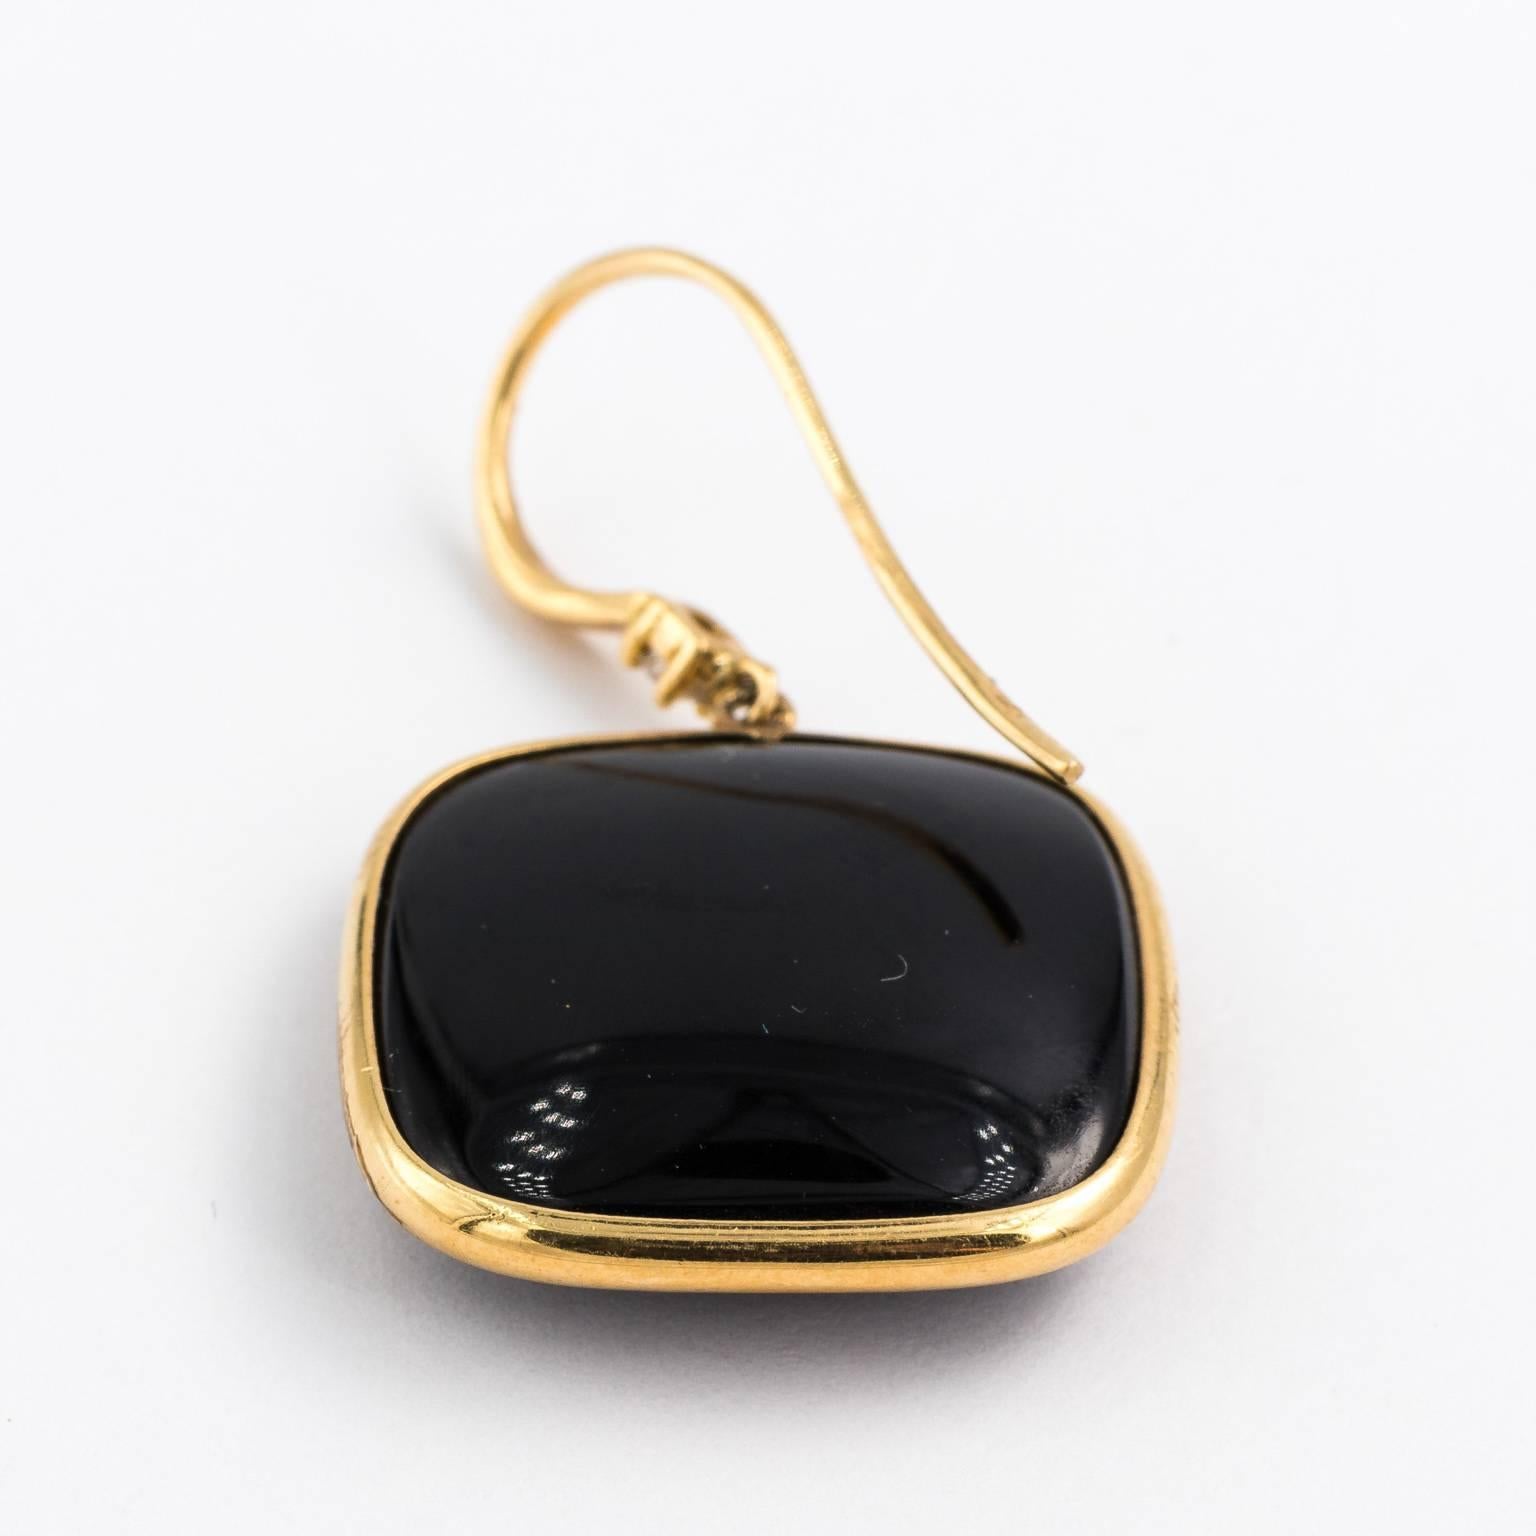 Modern 18 karat gold, French wire faceted onyx earrings with 10 carat diamond on top of square.